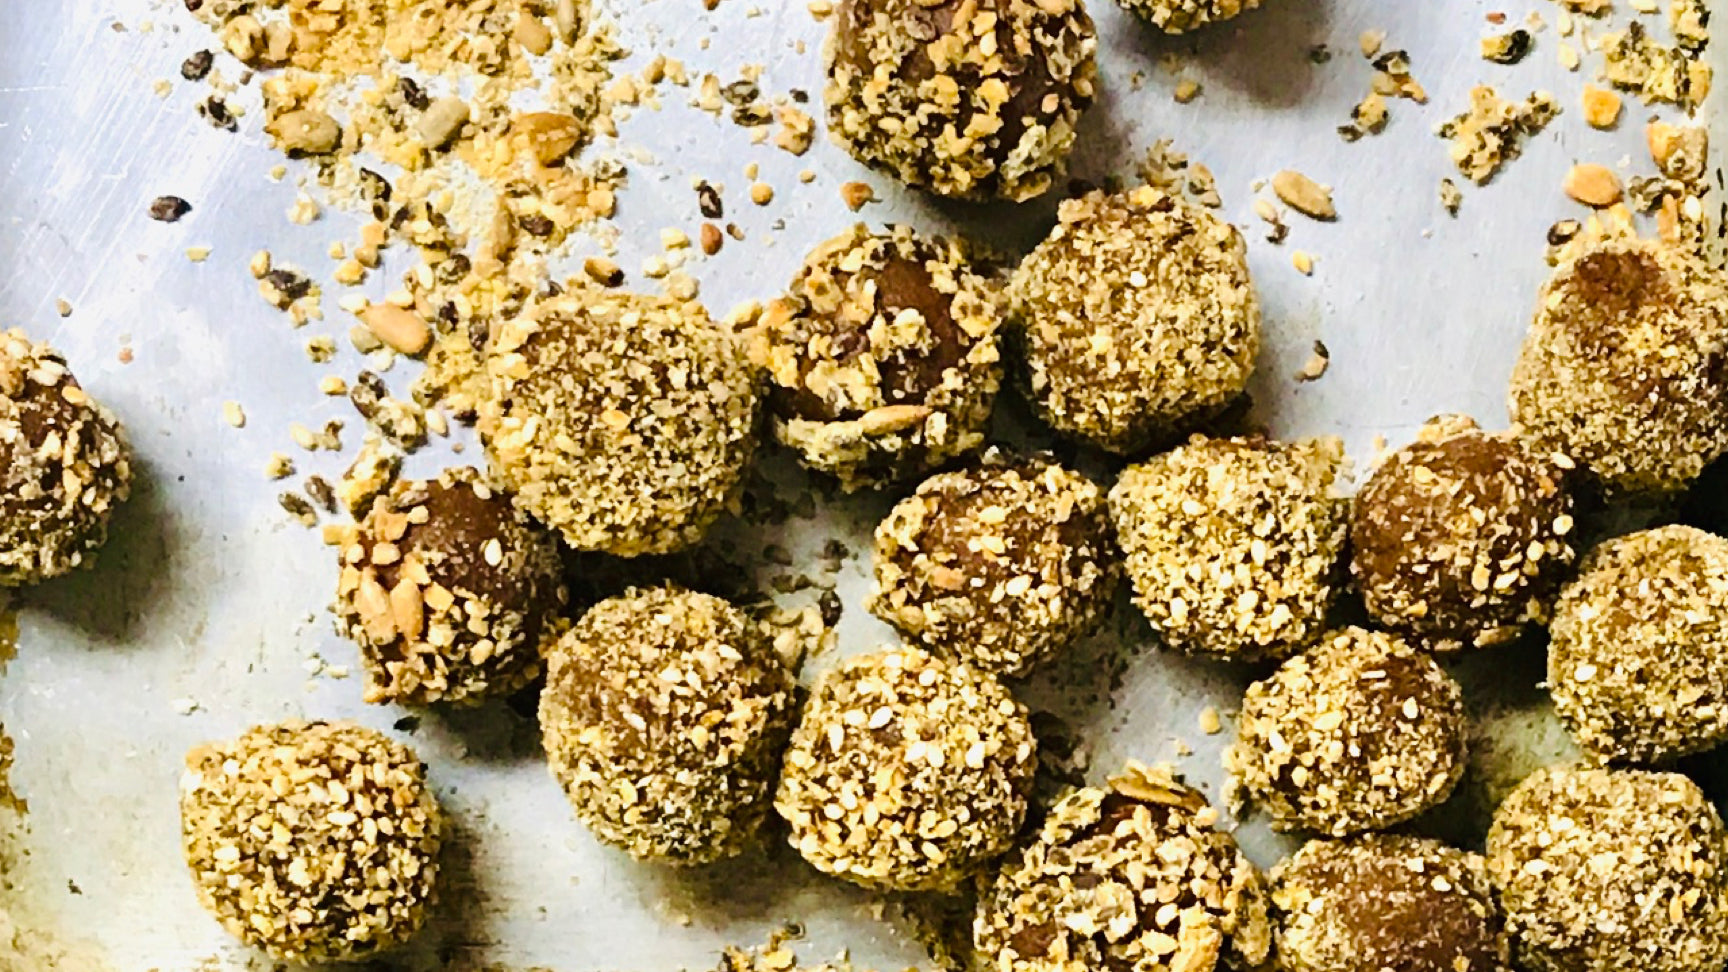 Cult Crackers - Chocolate Truffles with Cult Crackers Crumbles